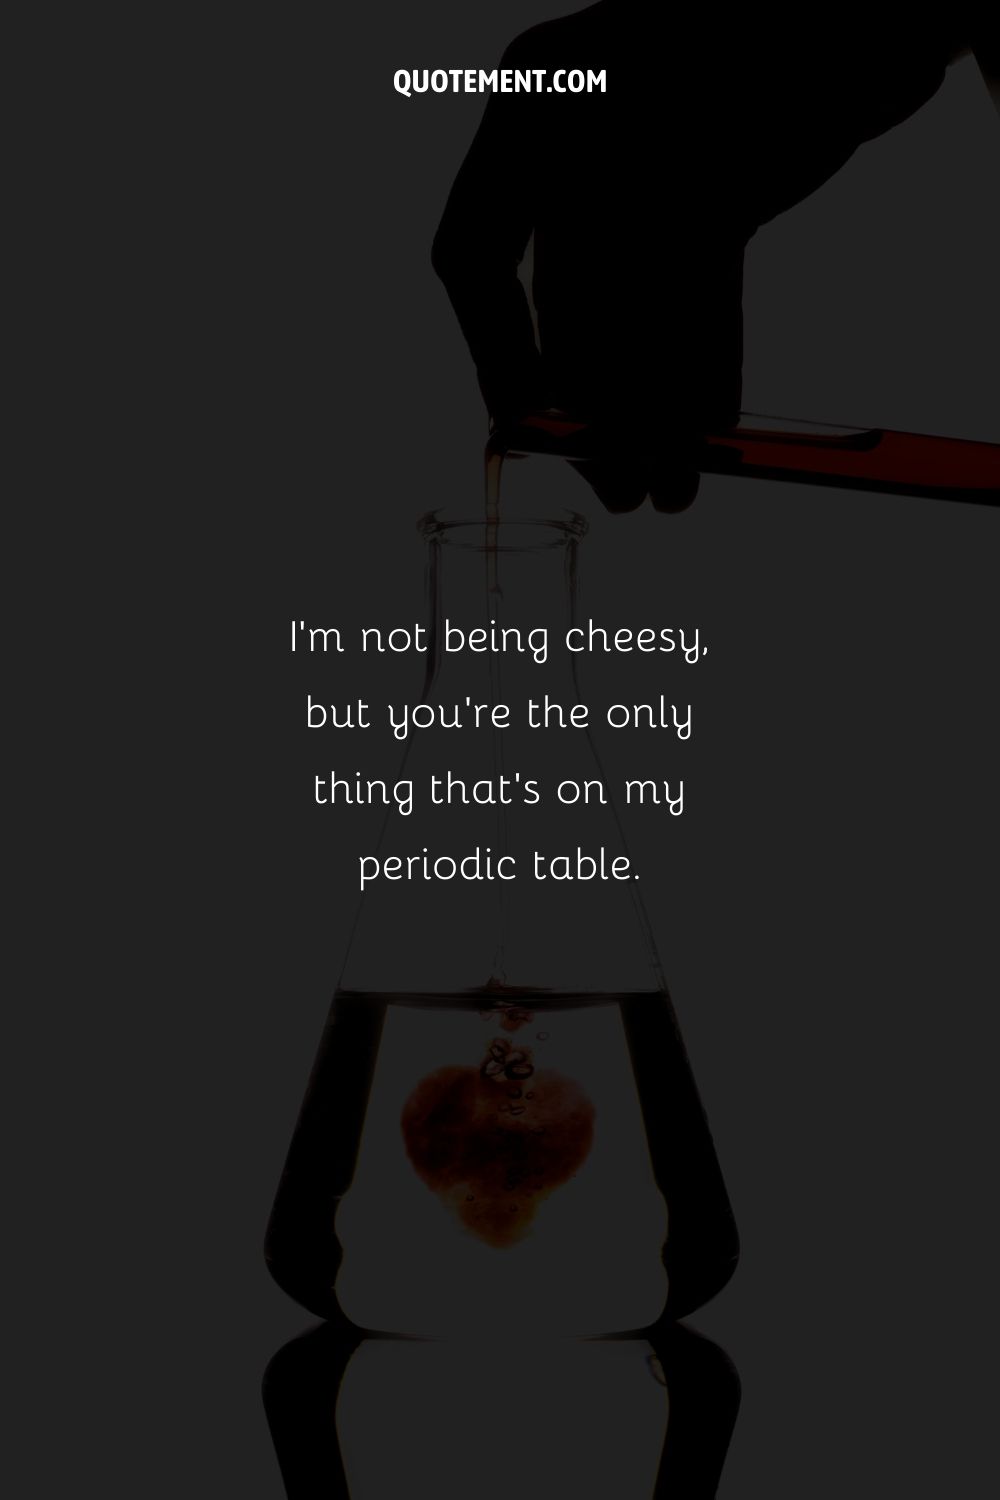 Awesome pick up line represented by the act of pouring liquid from the pipette into a conical flask